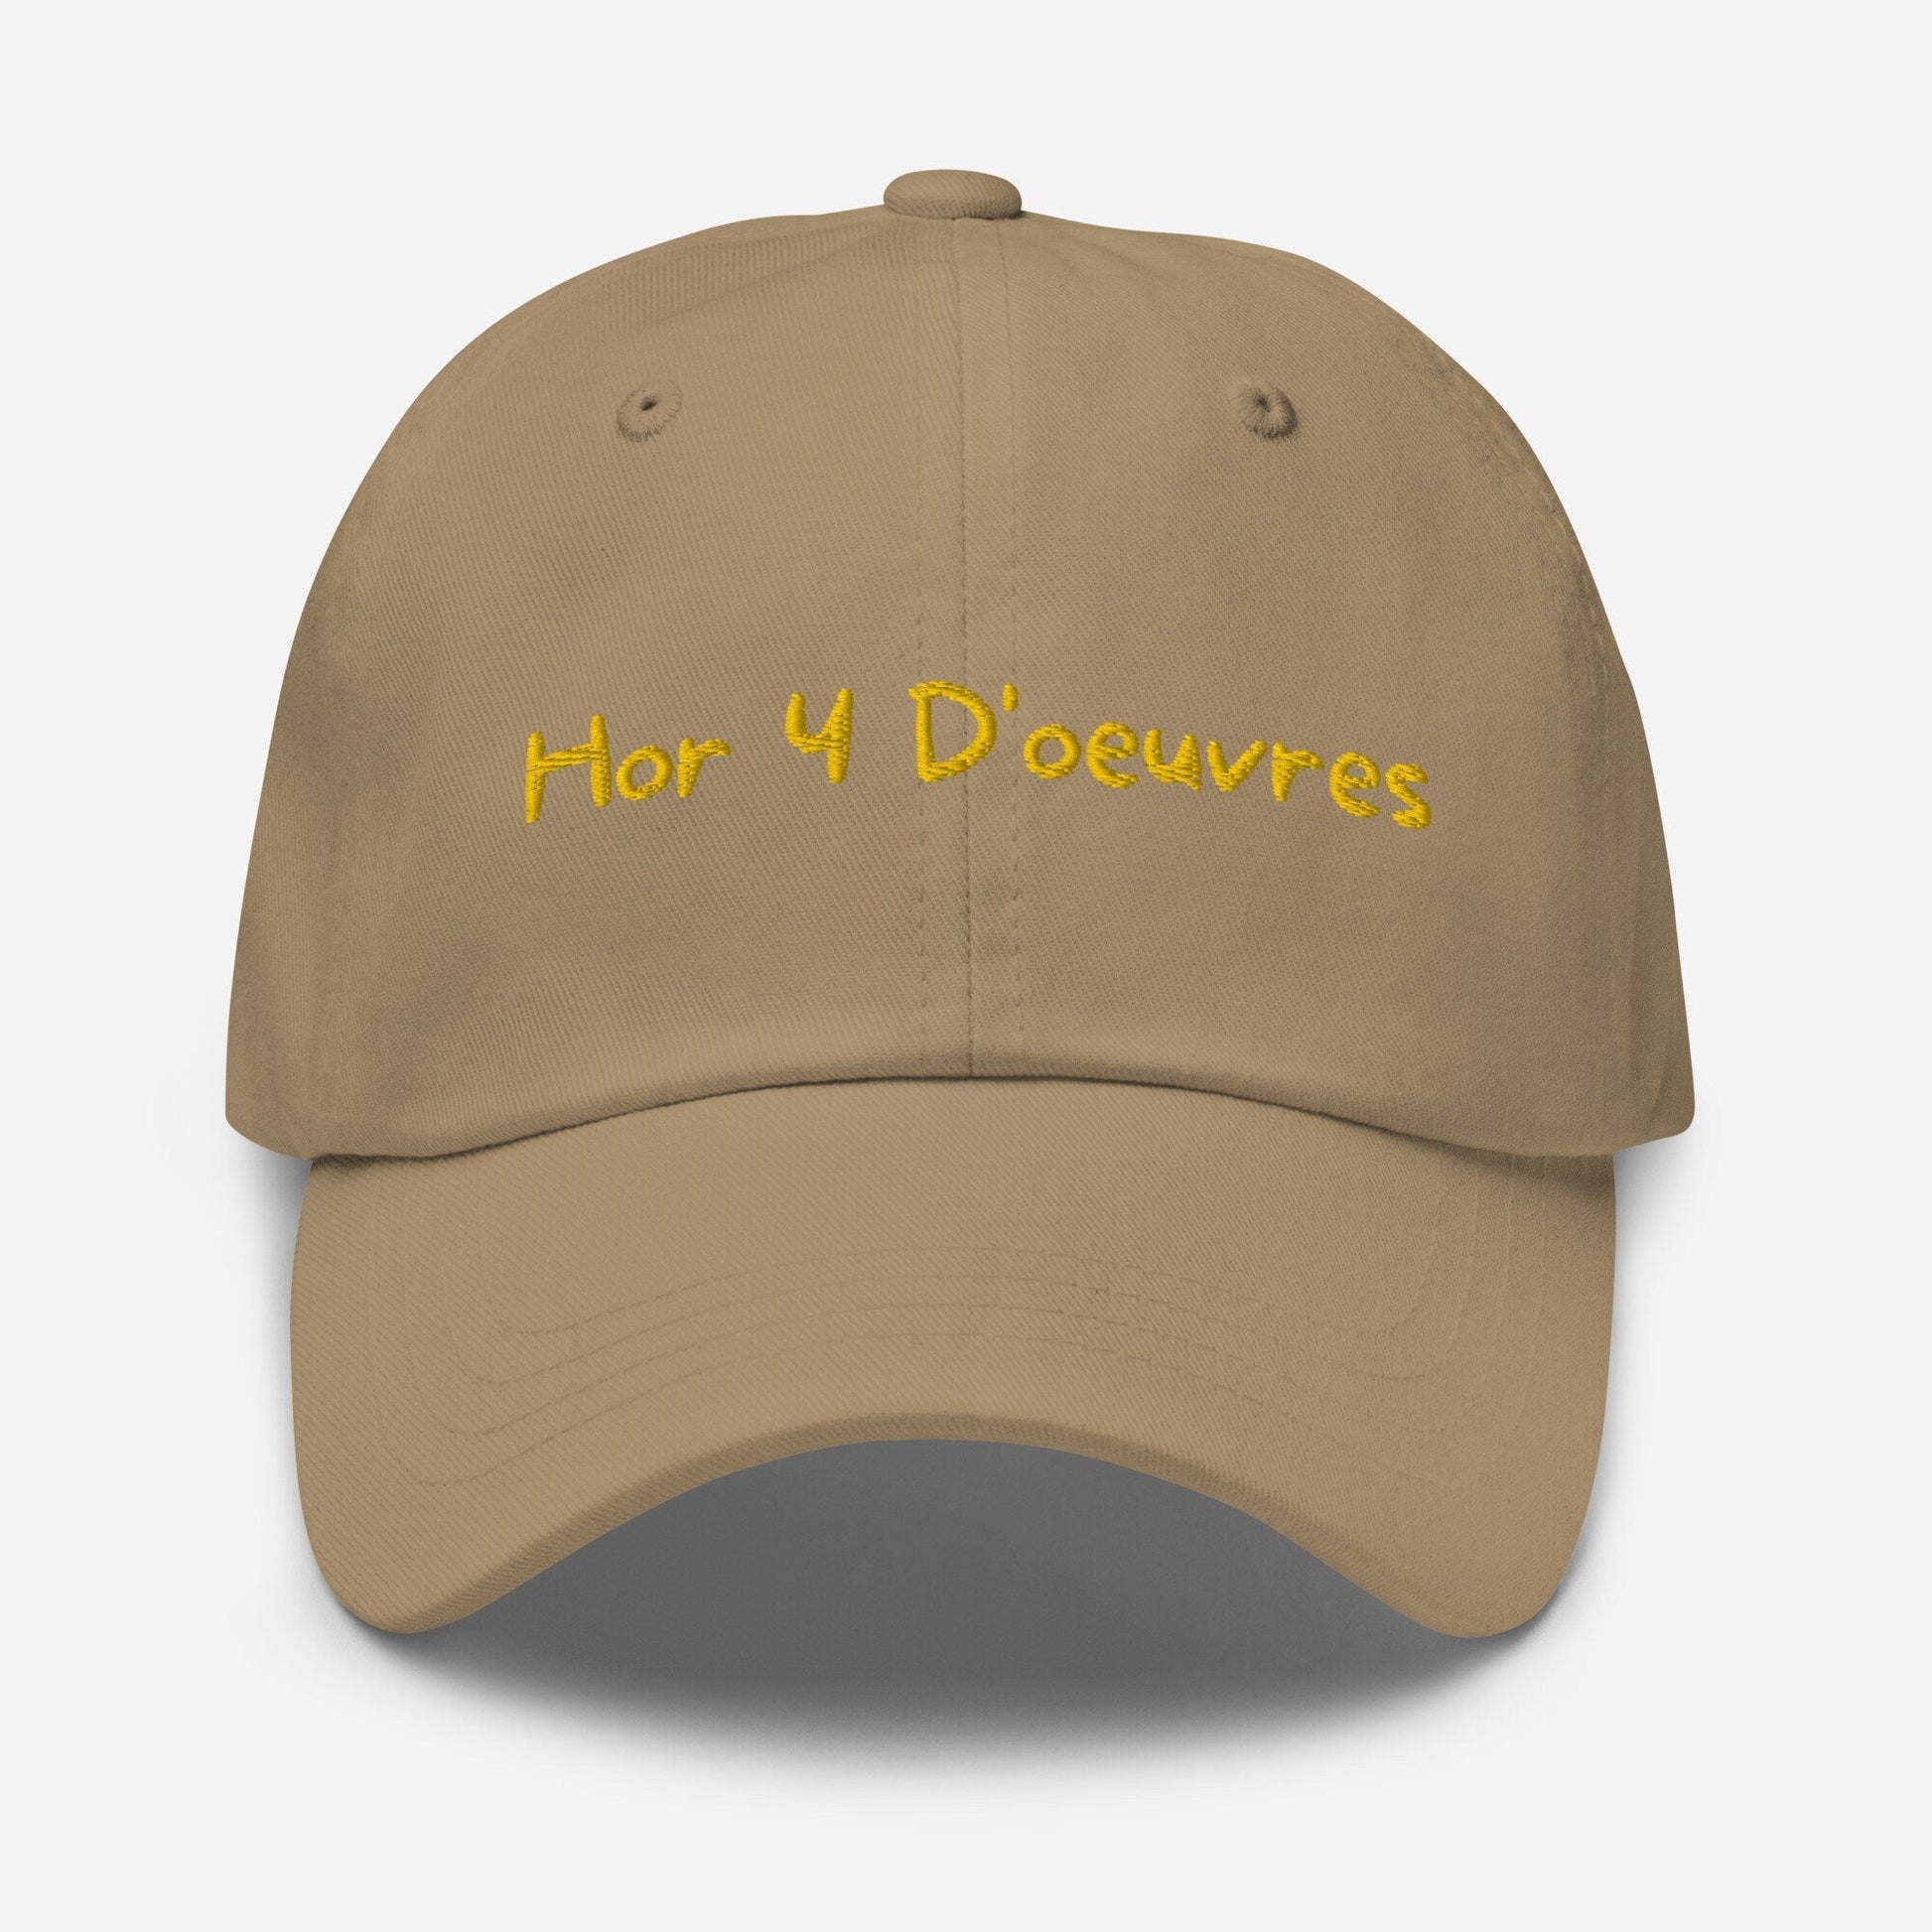 Hors d'oeuvre Dad Hat - Gift for food lovers and home chefs - Embroidered Cotton Cap - Evilwater Originals